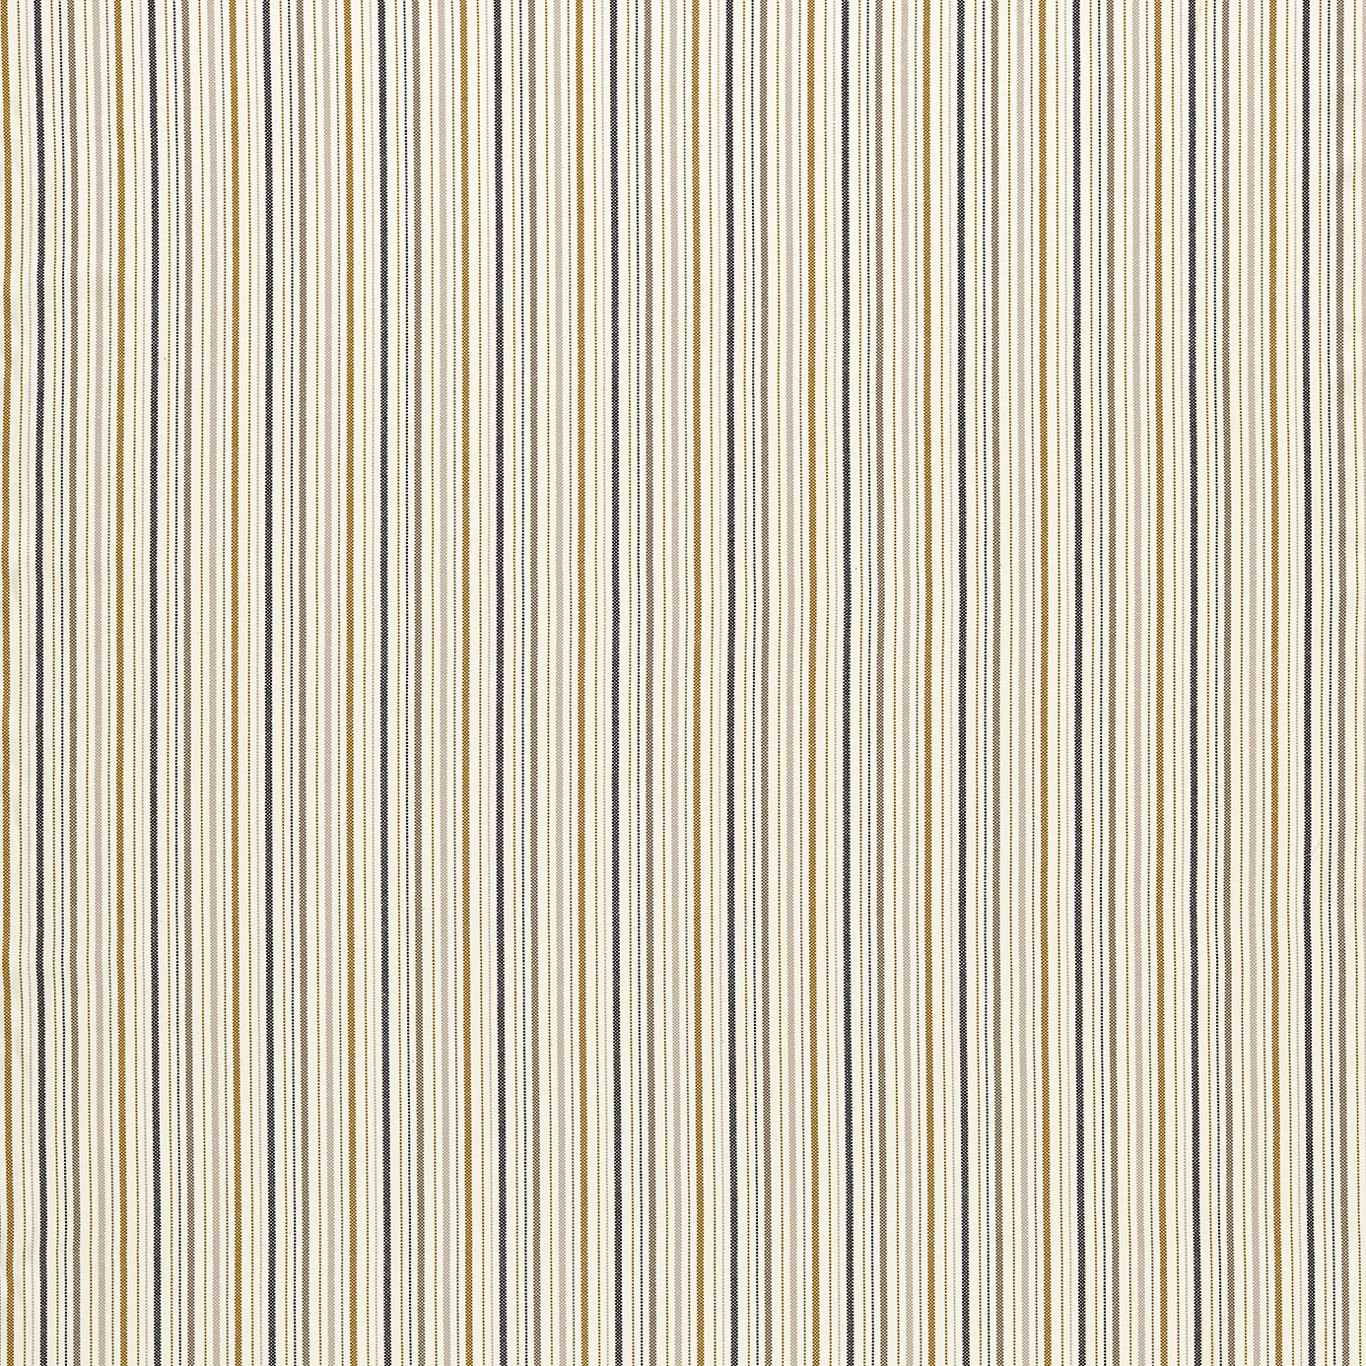 Maryland Ochre/Charcoal Fabric by CNC